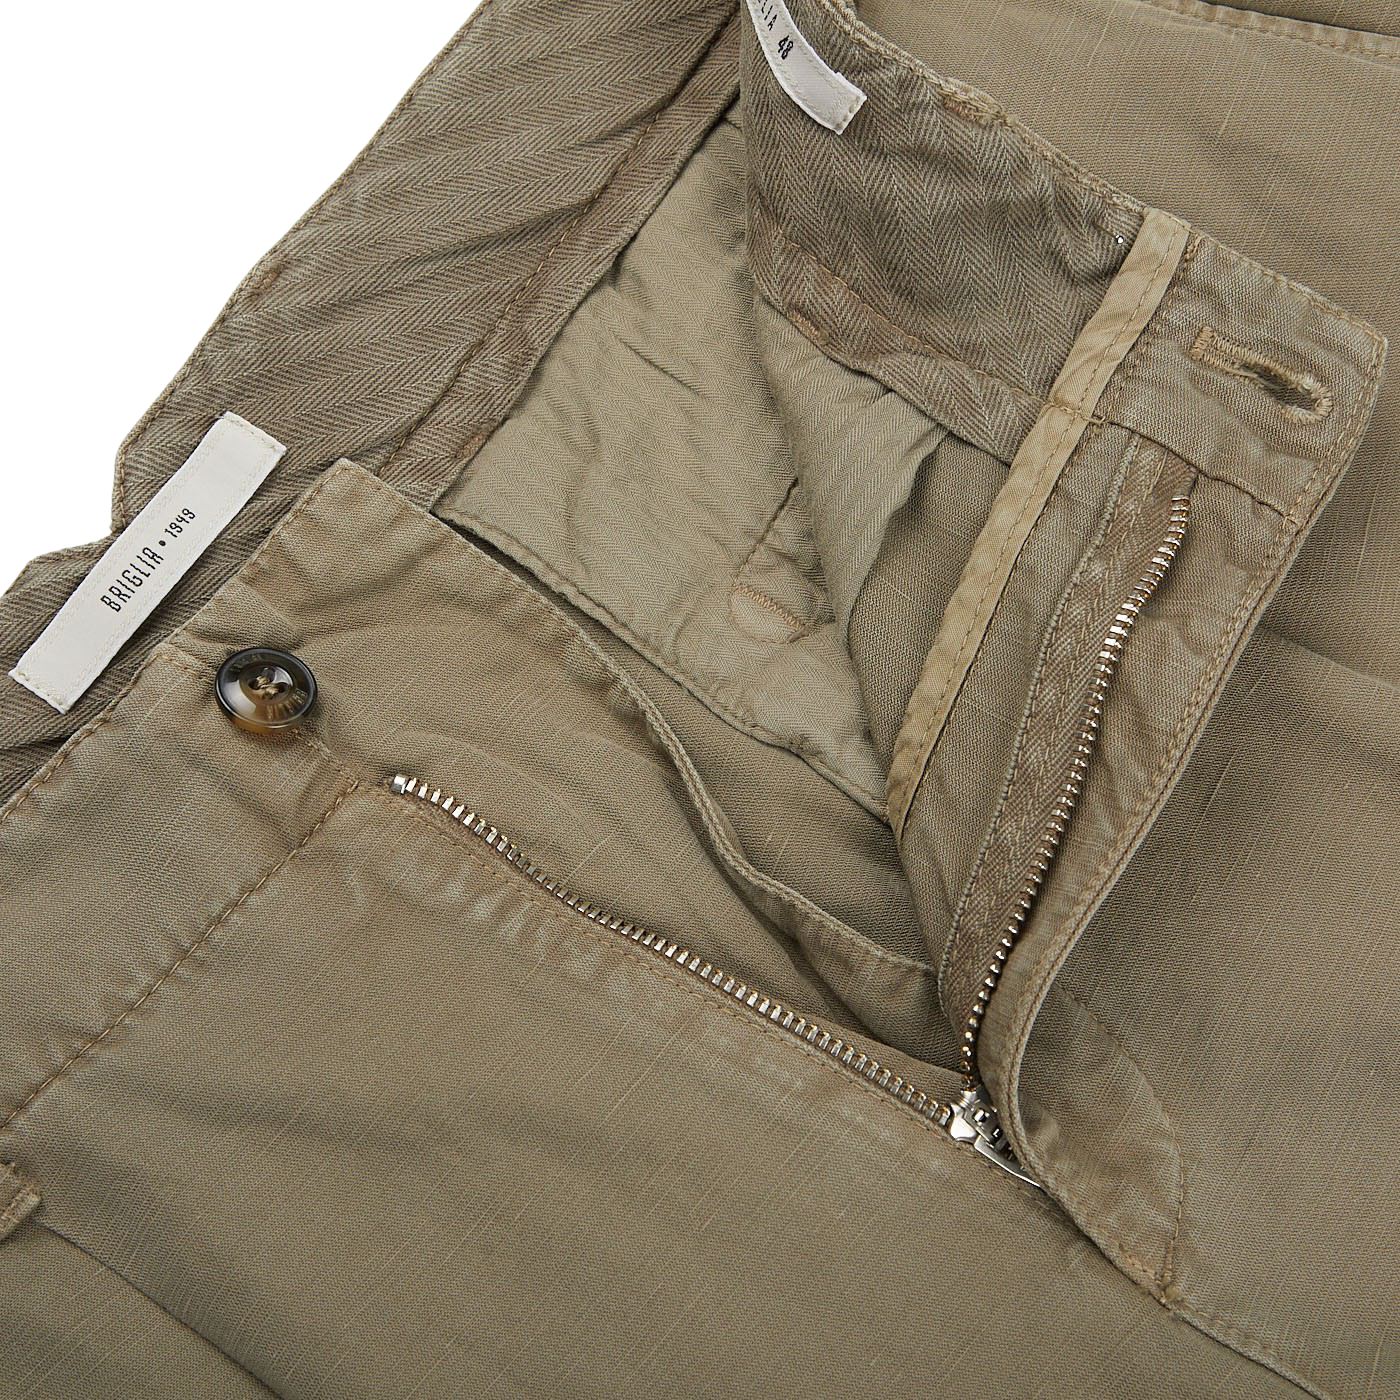 A pair of Briglia Olive Cotton Linen BG59 Pleated Chinos with zippered pockets, offering an easy-fit design.